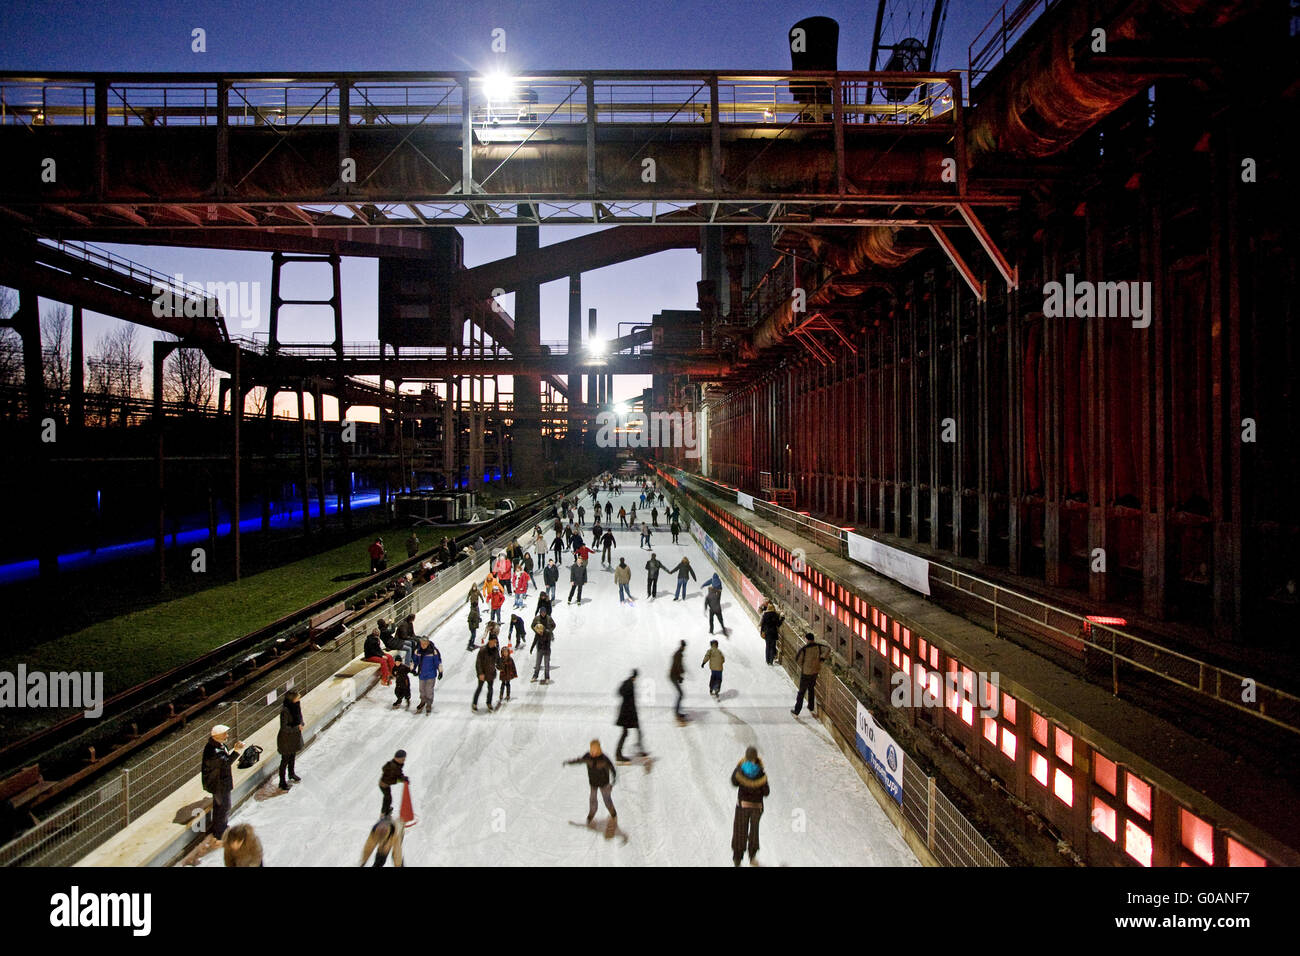 People at the rink, Zollverein, Essen, Germany Stock Photo